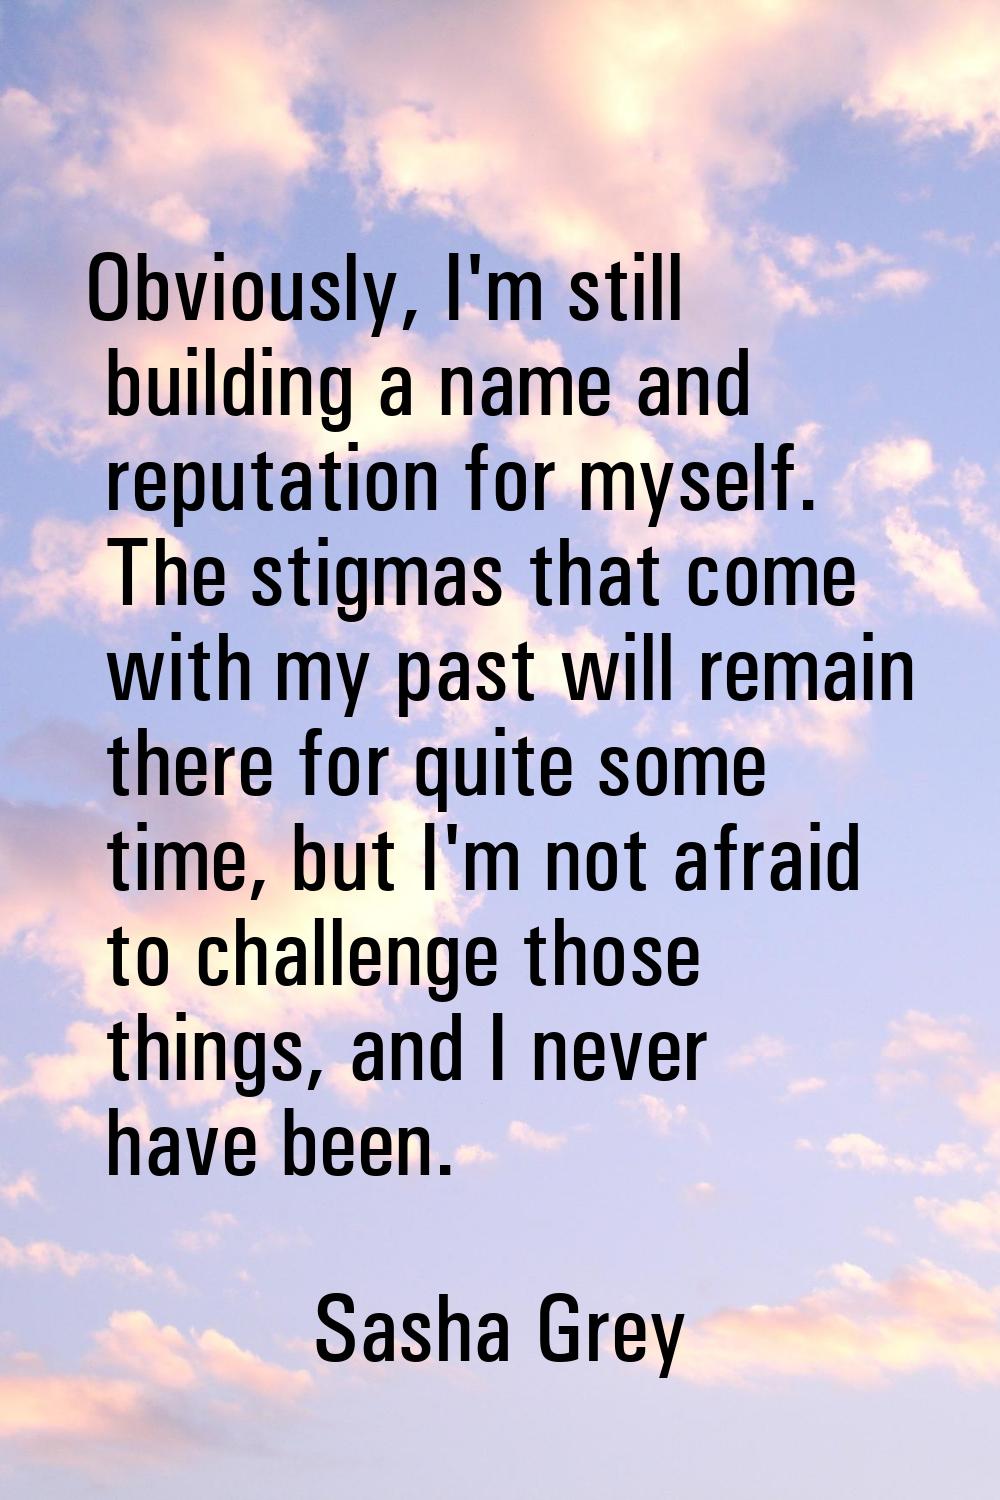 Obviously, I'm still building a name and reputation for myself. The stigmas that come with my past 